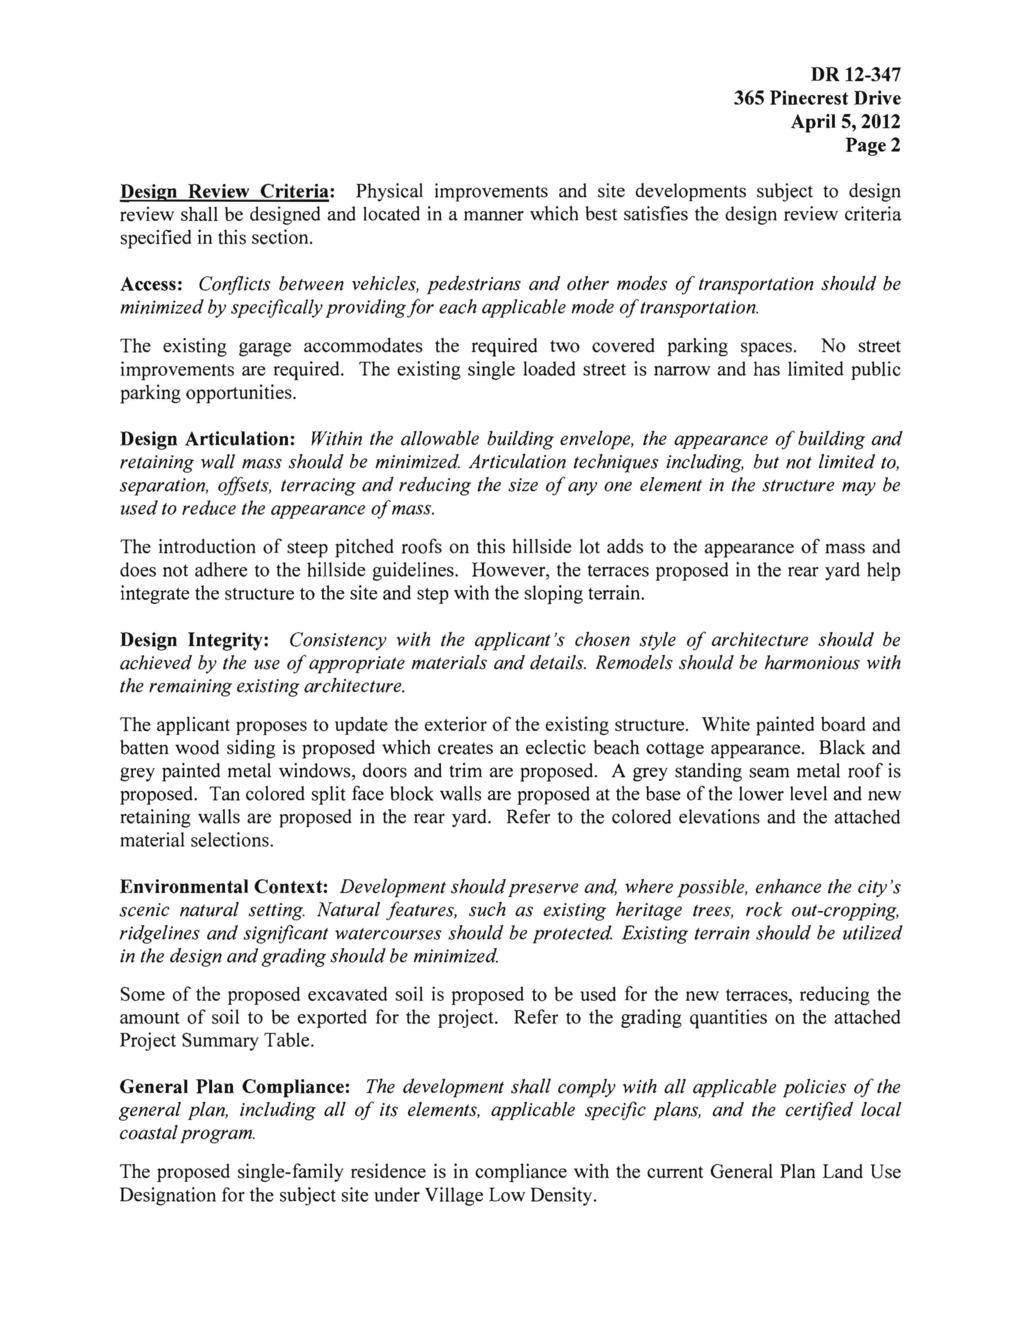 DR 12-347 April 5, 2012 Page 2 Design Review Criteria: Physical improvements and site developments subject to design review shall be designed and located in a manner which best satisfies the design